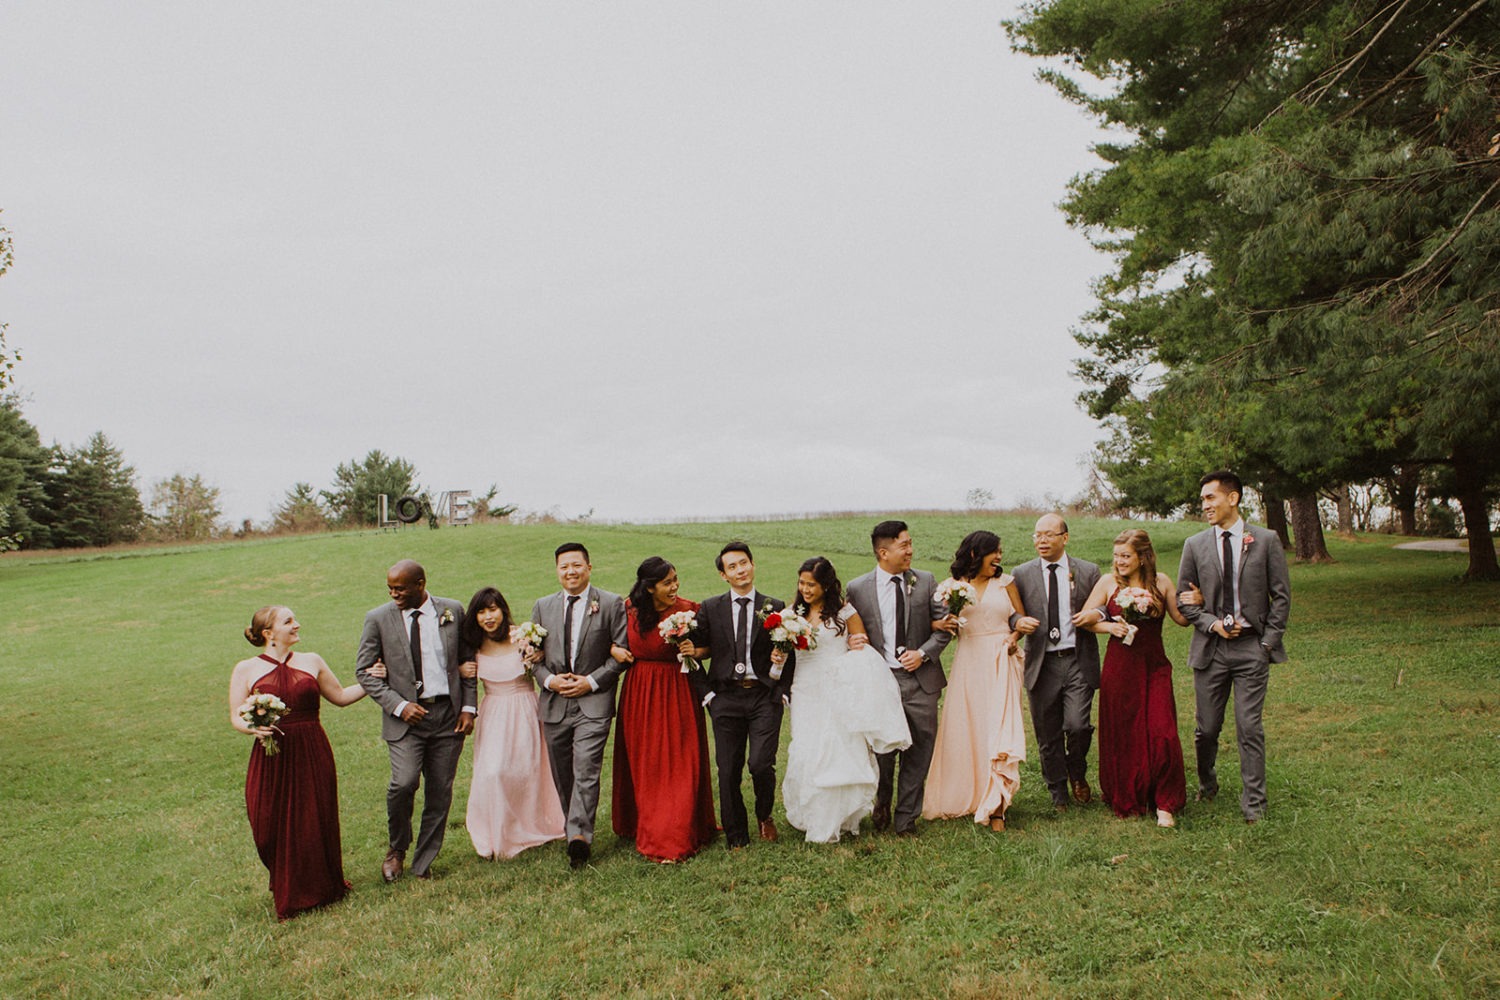 Bridal party walks in field with bride and groom at Virginia outdoor wedding.